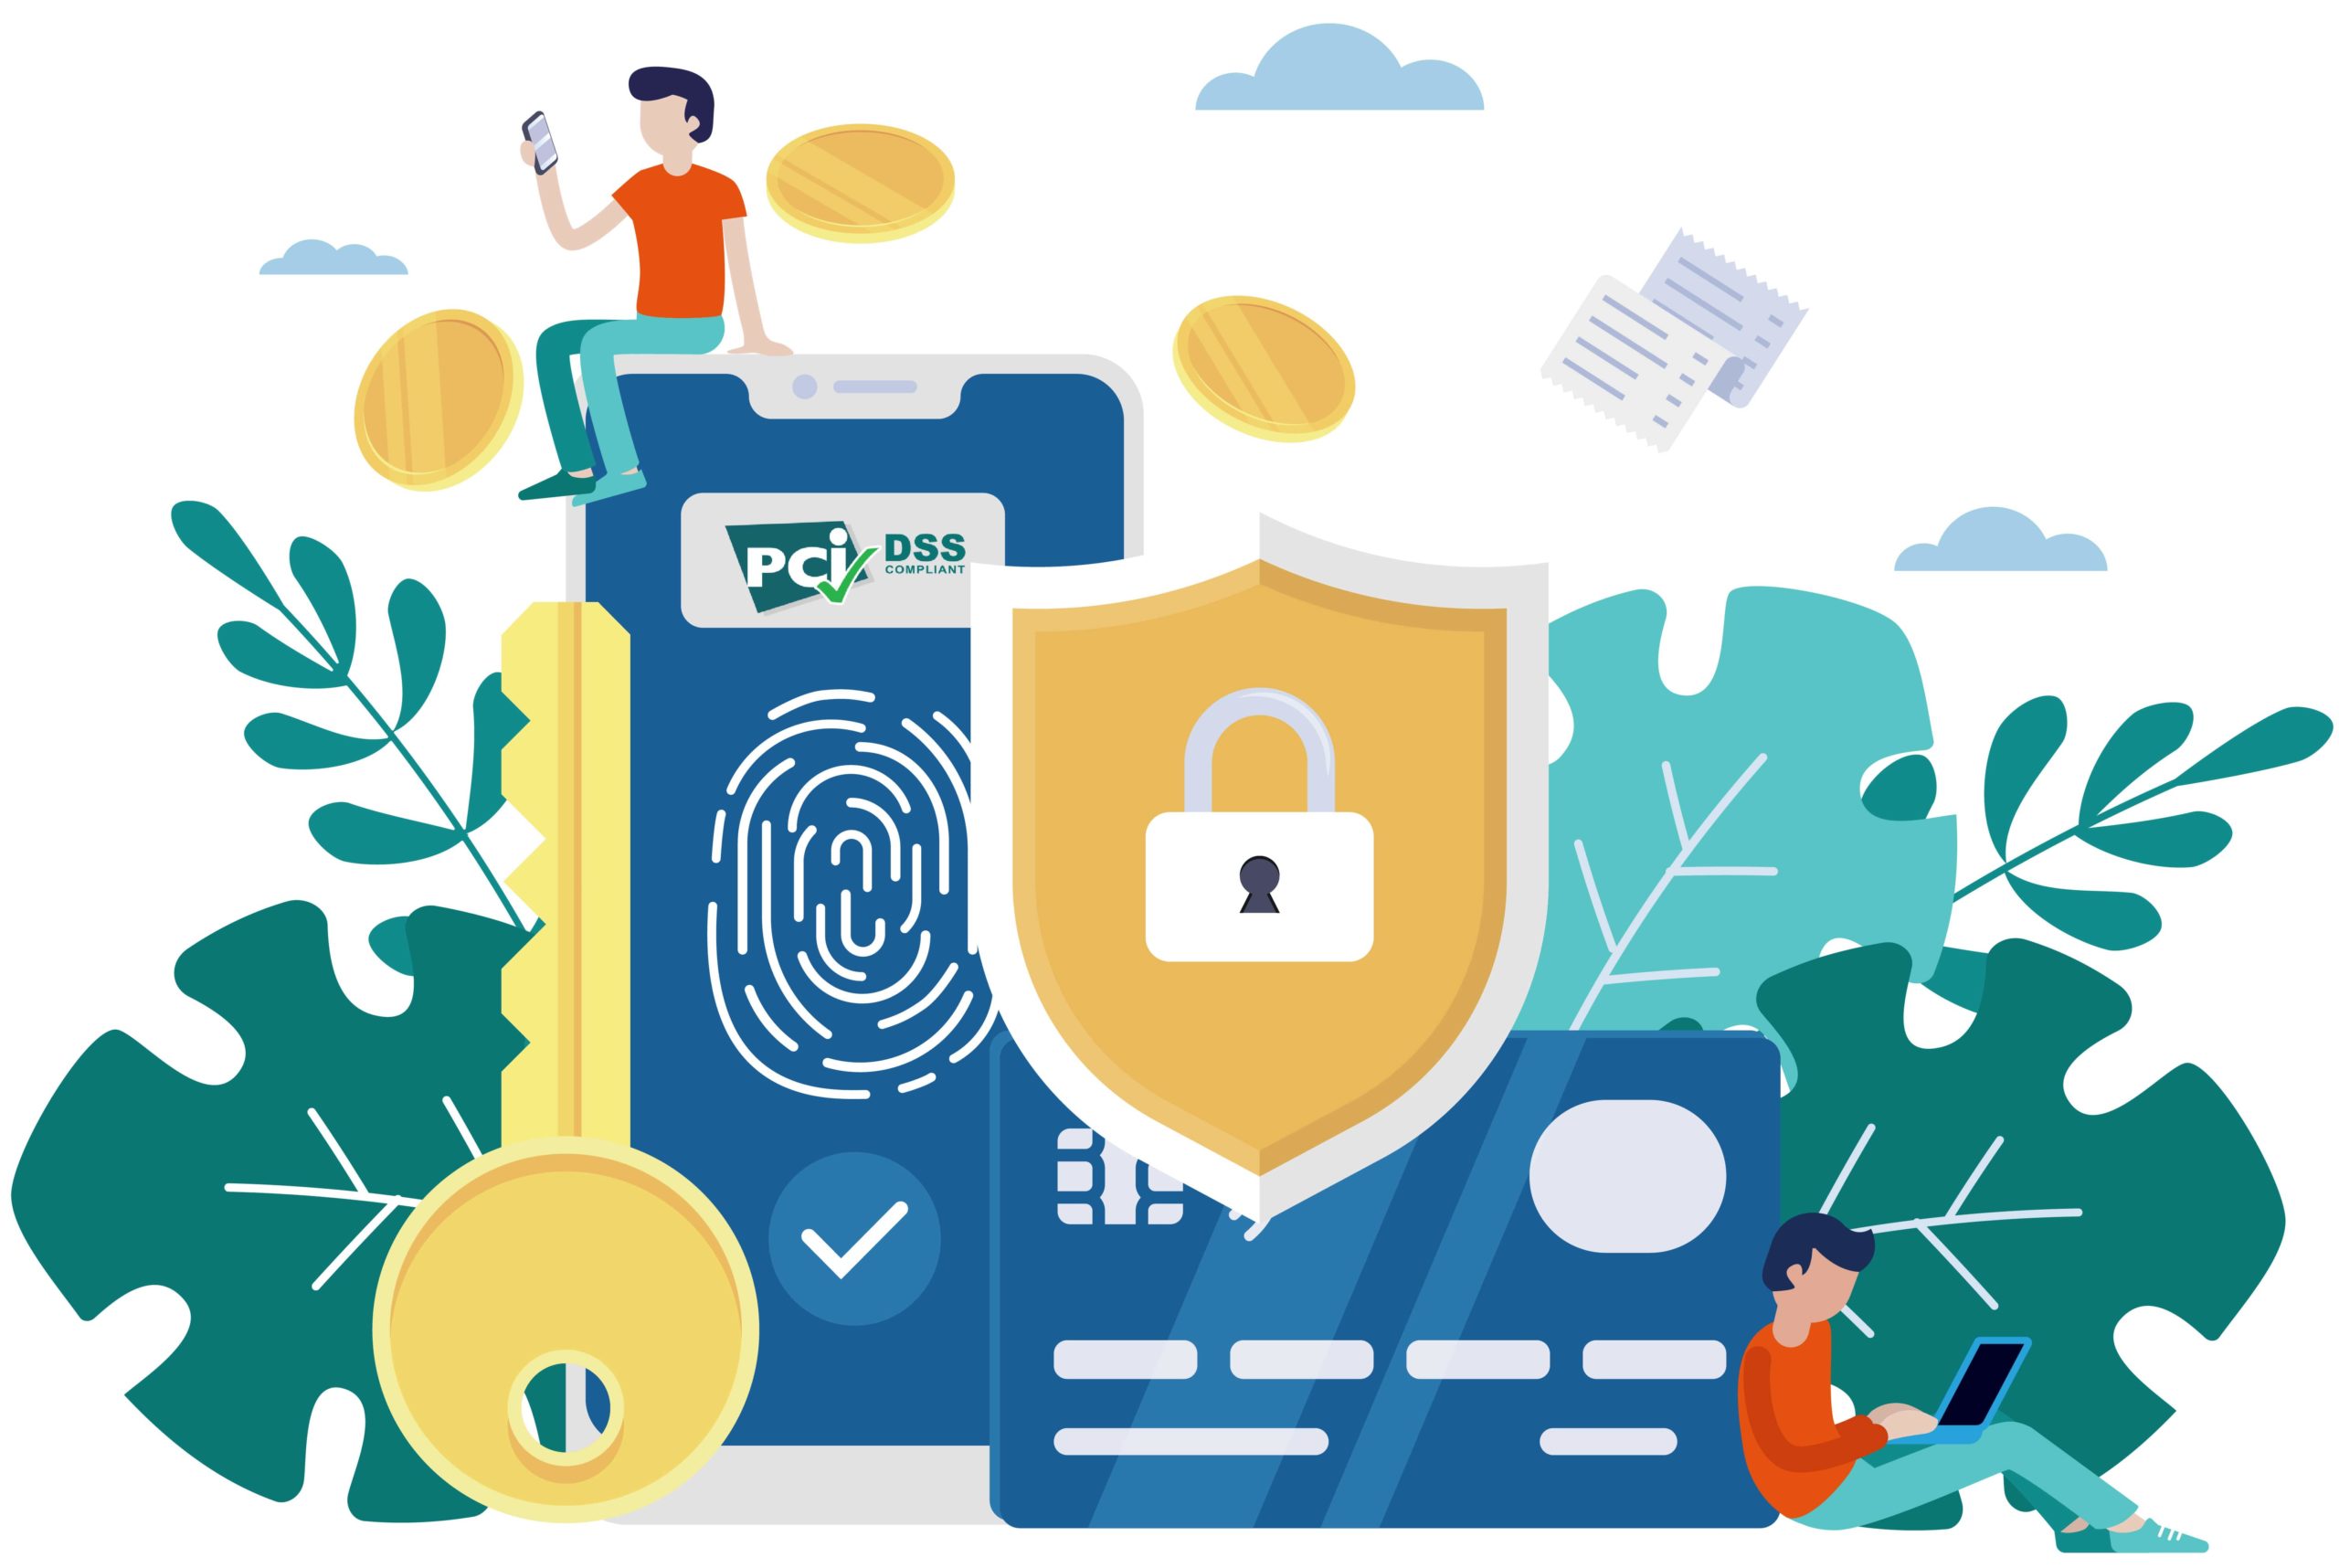 Graphic showing a credit card, smart phone, a shield with a lock, and 2 people checking their computers for PCI DSS compliance